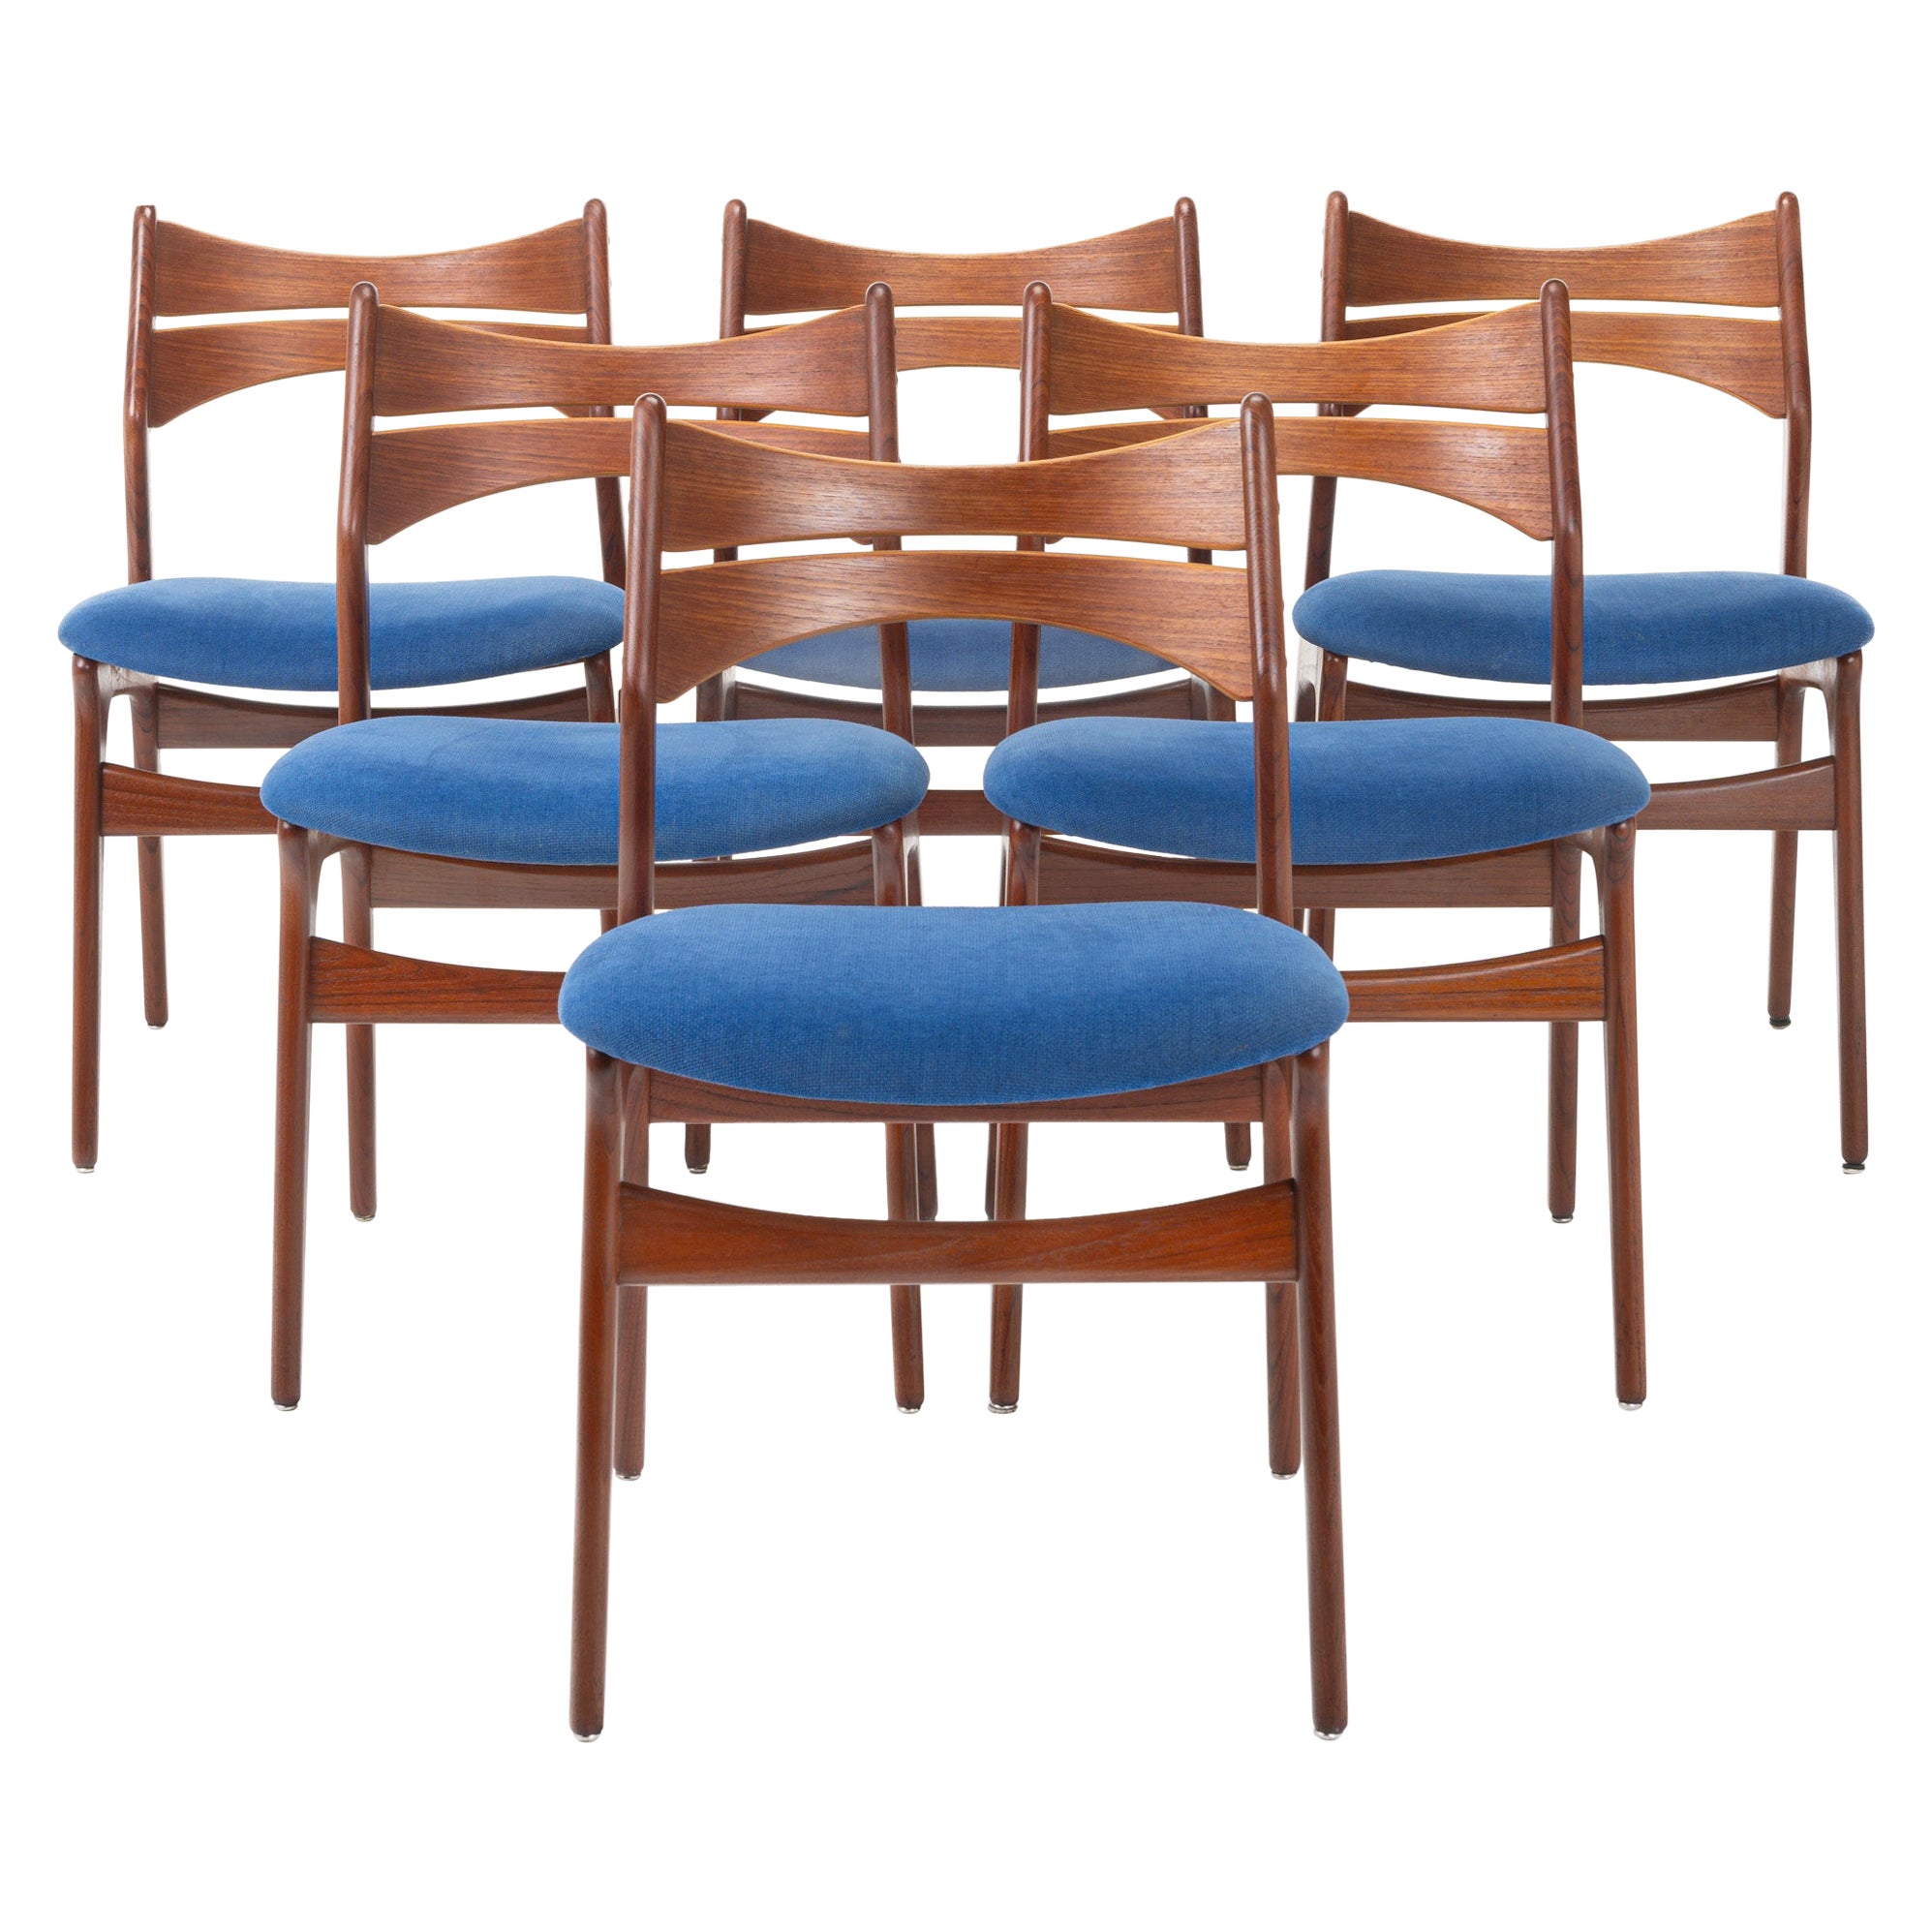 Set of six 'Model 310' dining chairs by Erik Buch for Christian Christensen